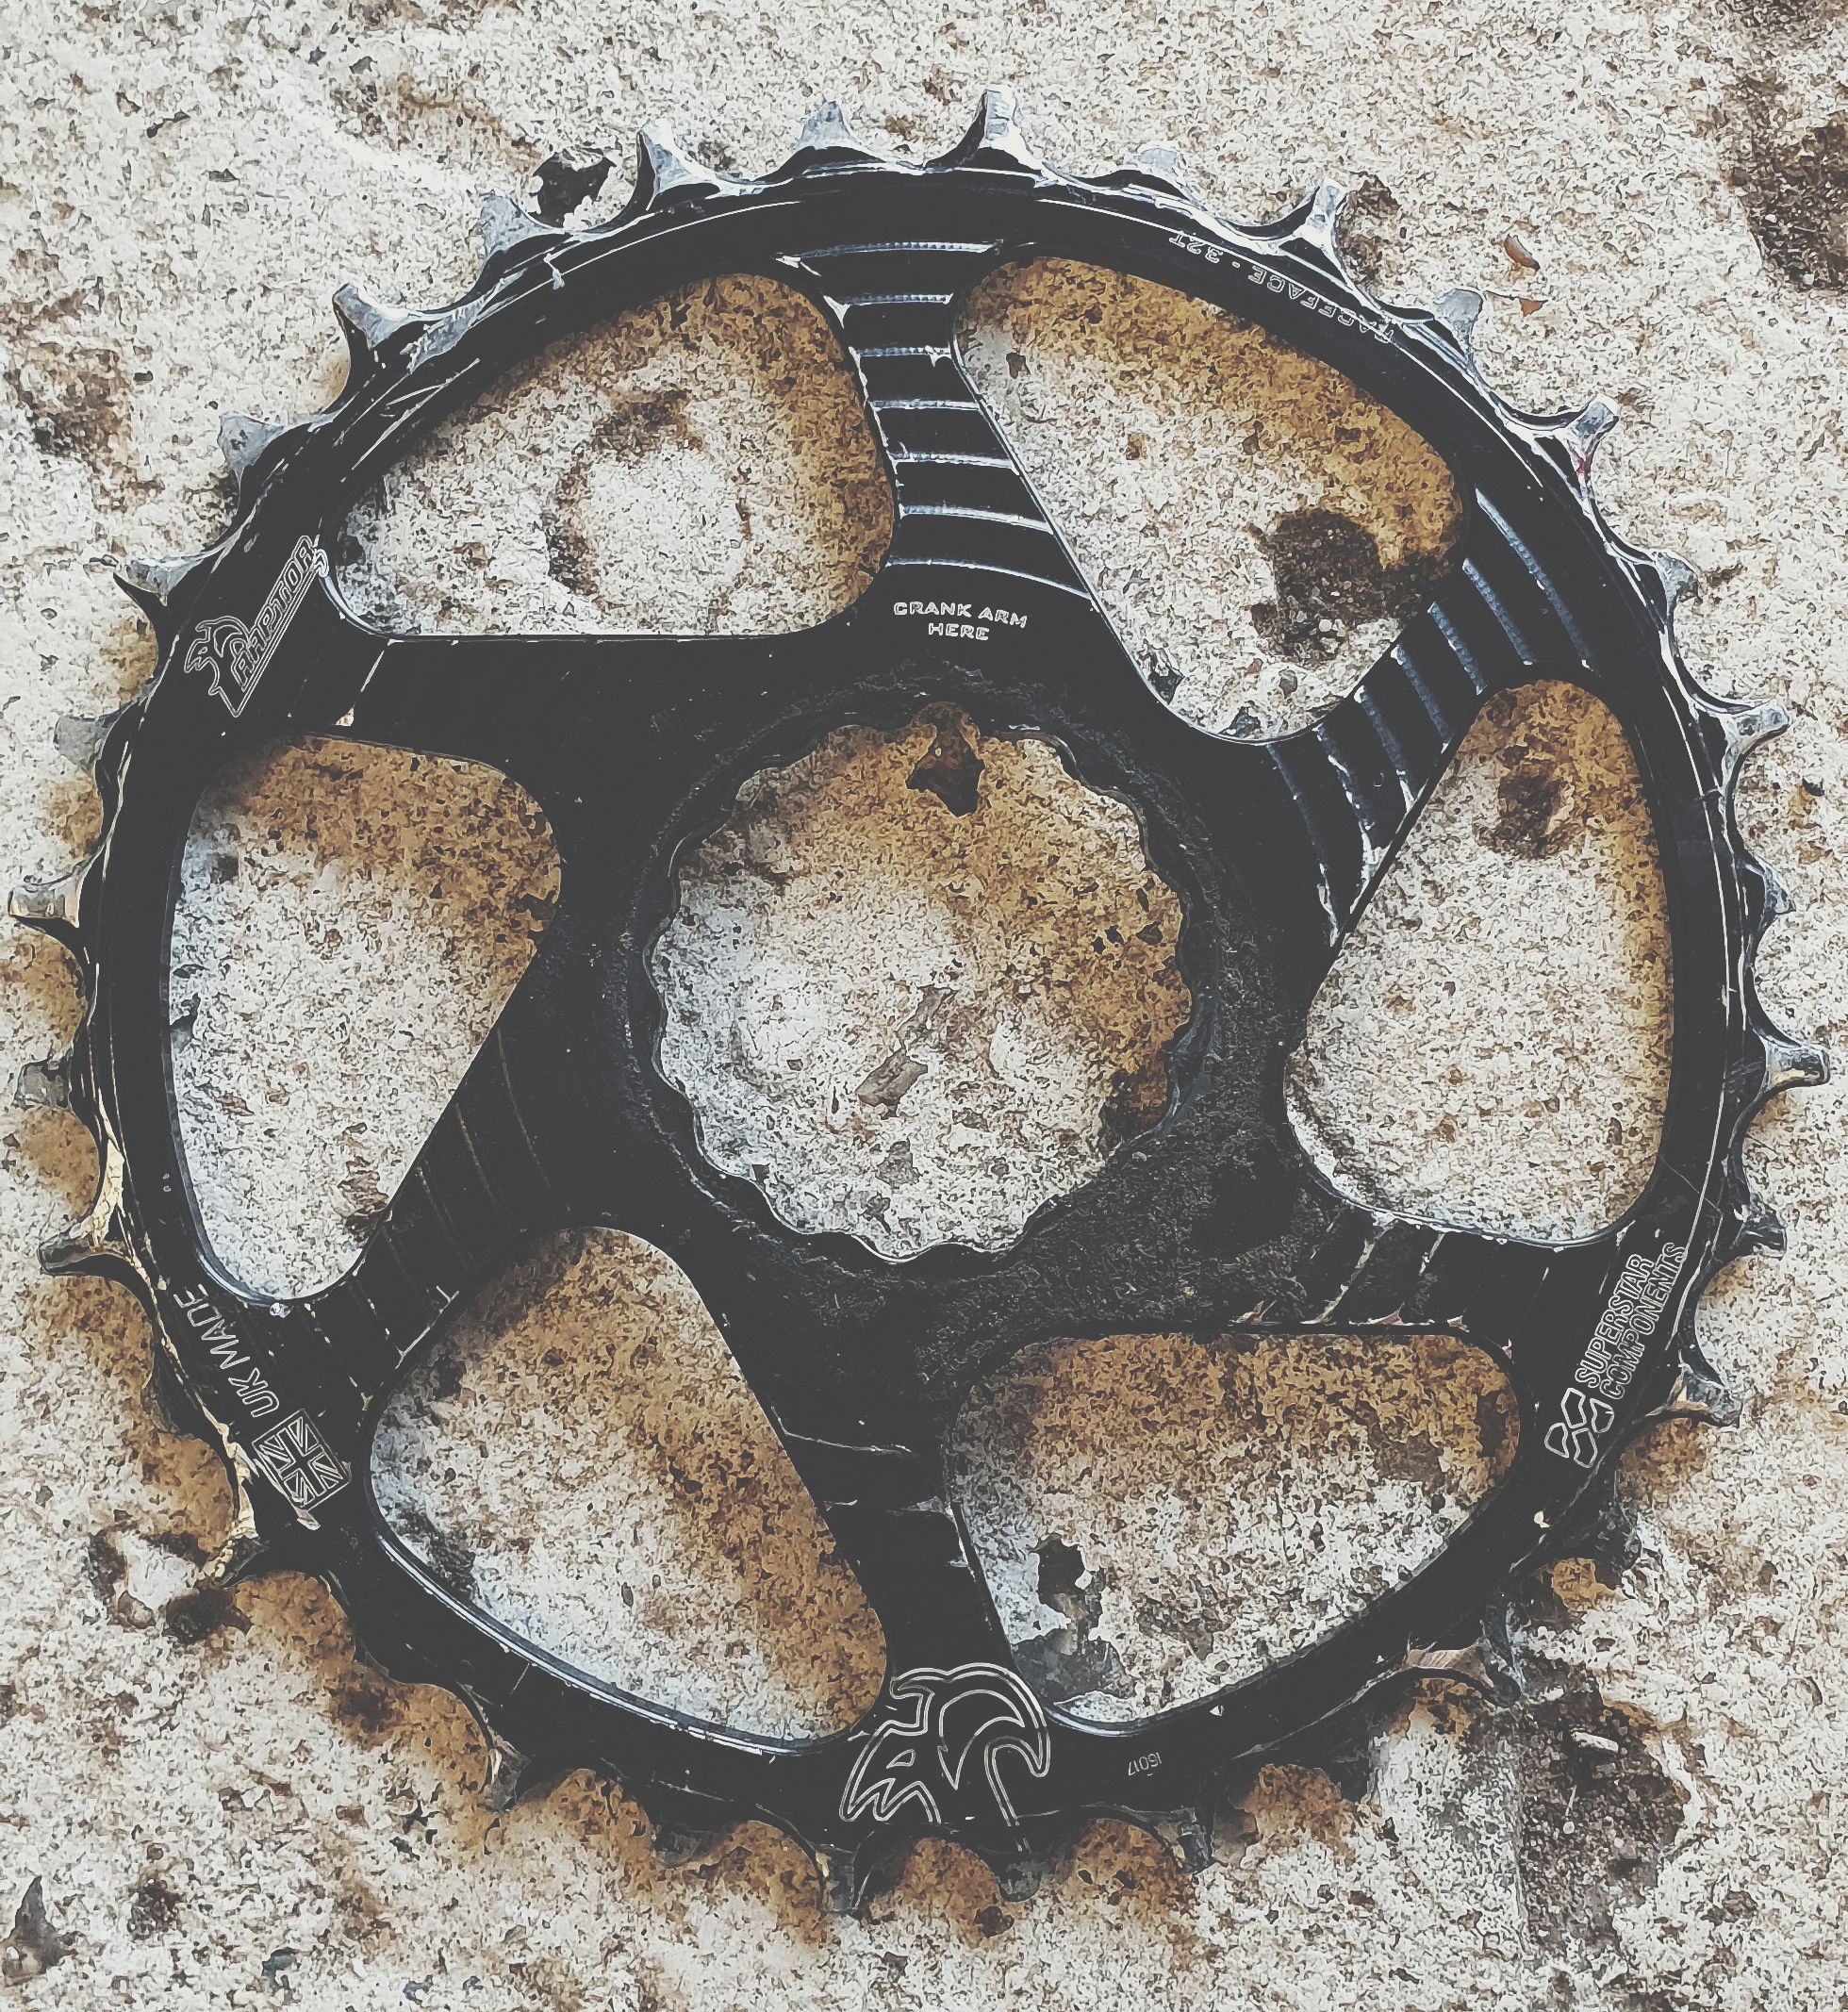 Superstar Components Raptor Chainring Raceface Cinch long term review